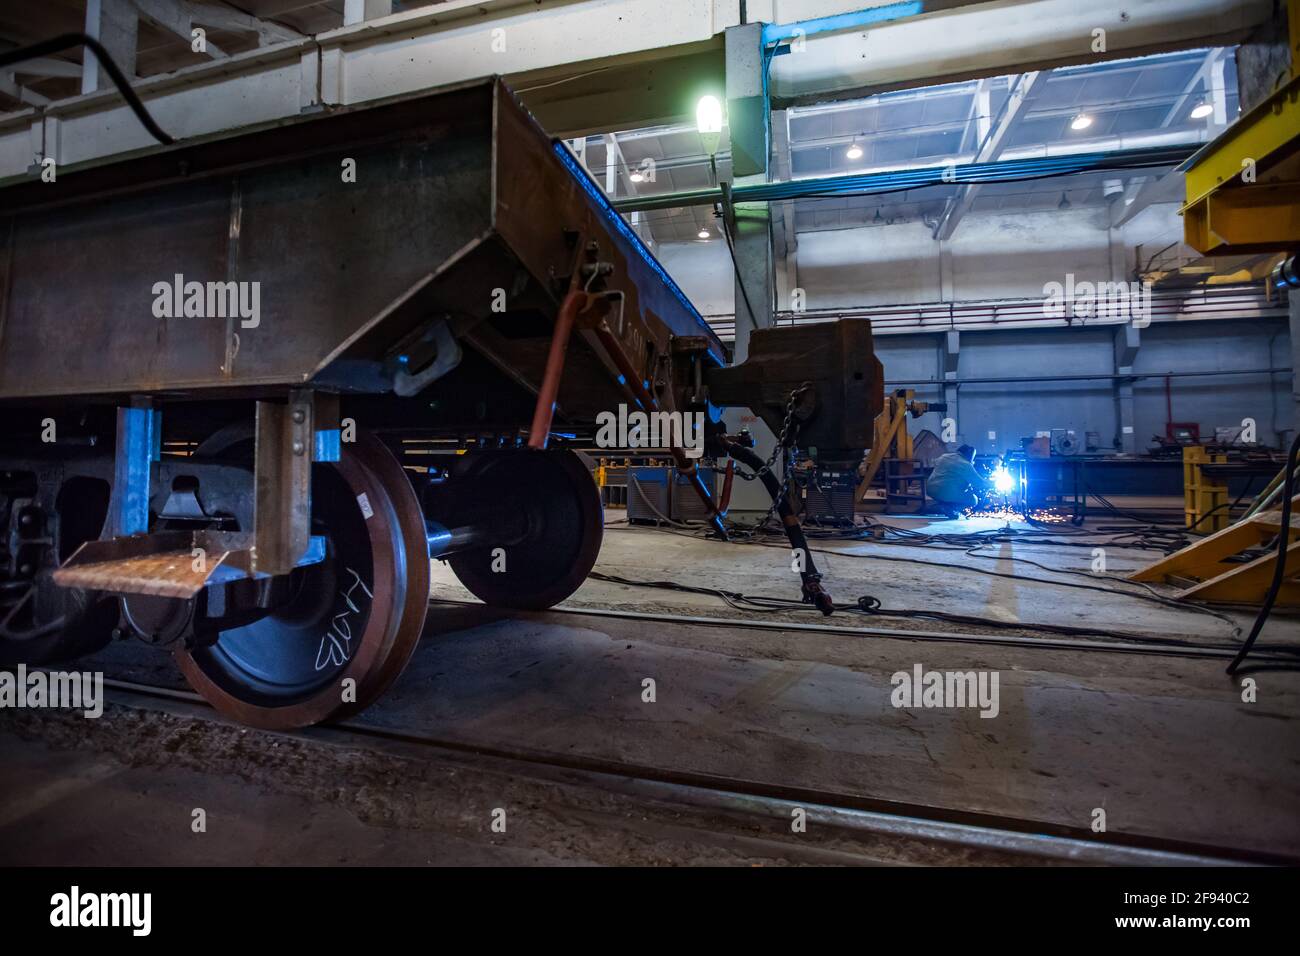 Train car-building plant. Welding metal parts on background. Train car on foreground. Focus on worker. Stock Photo